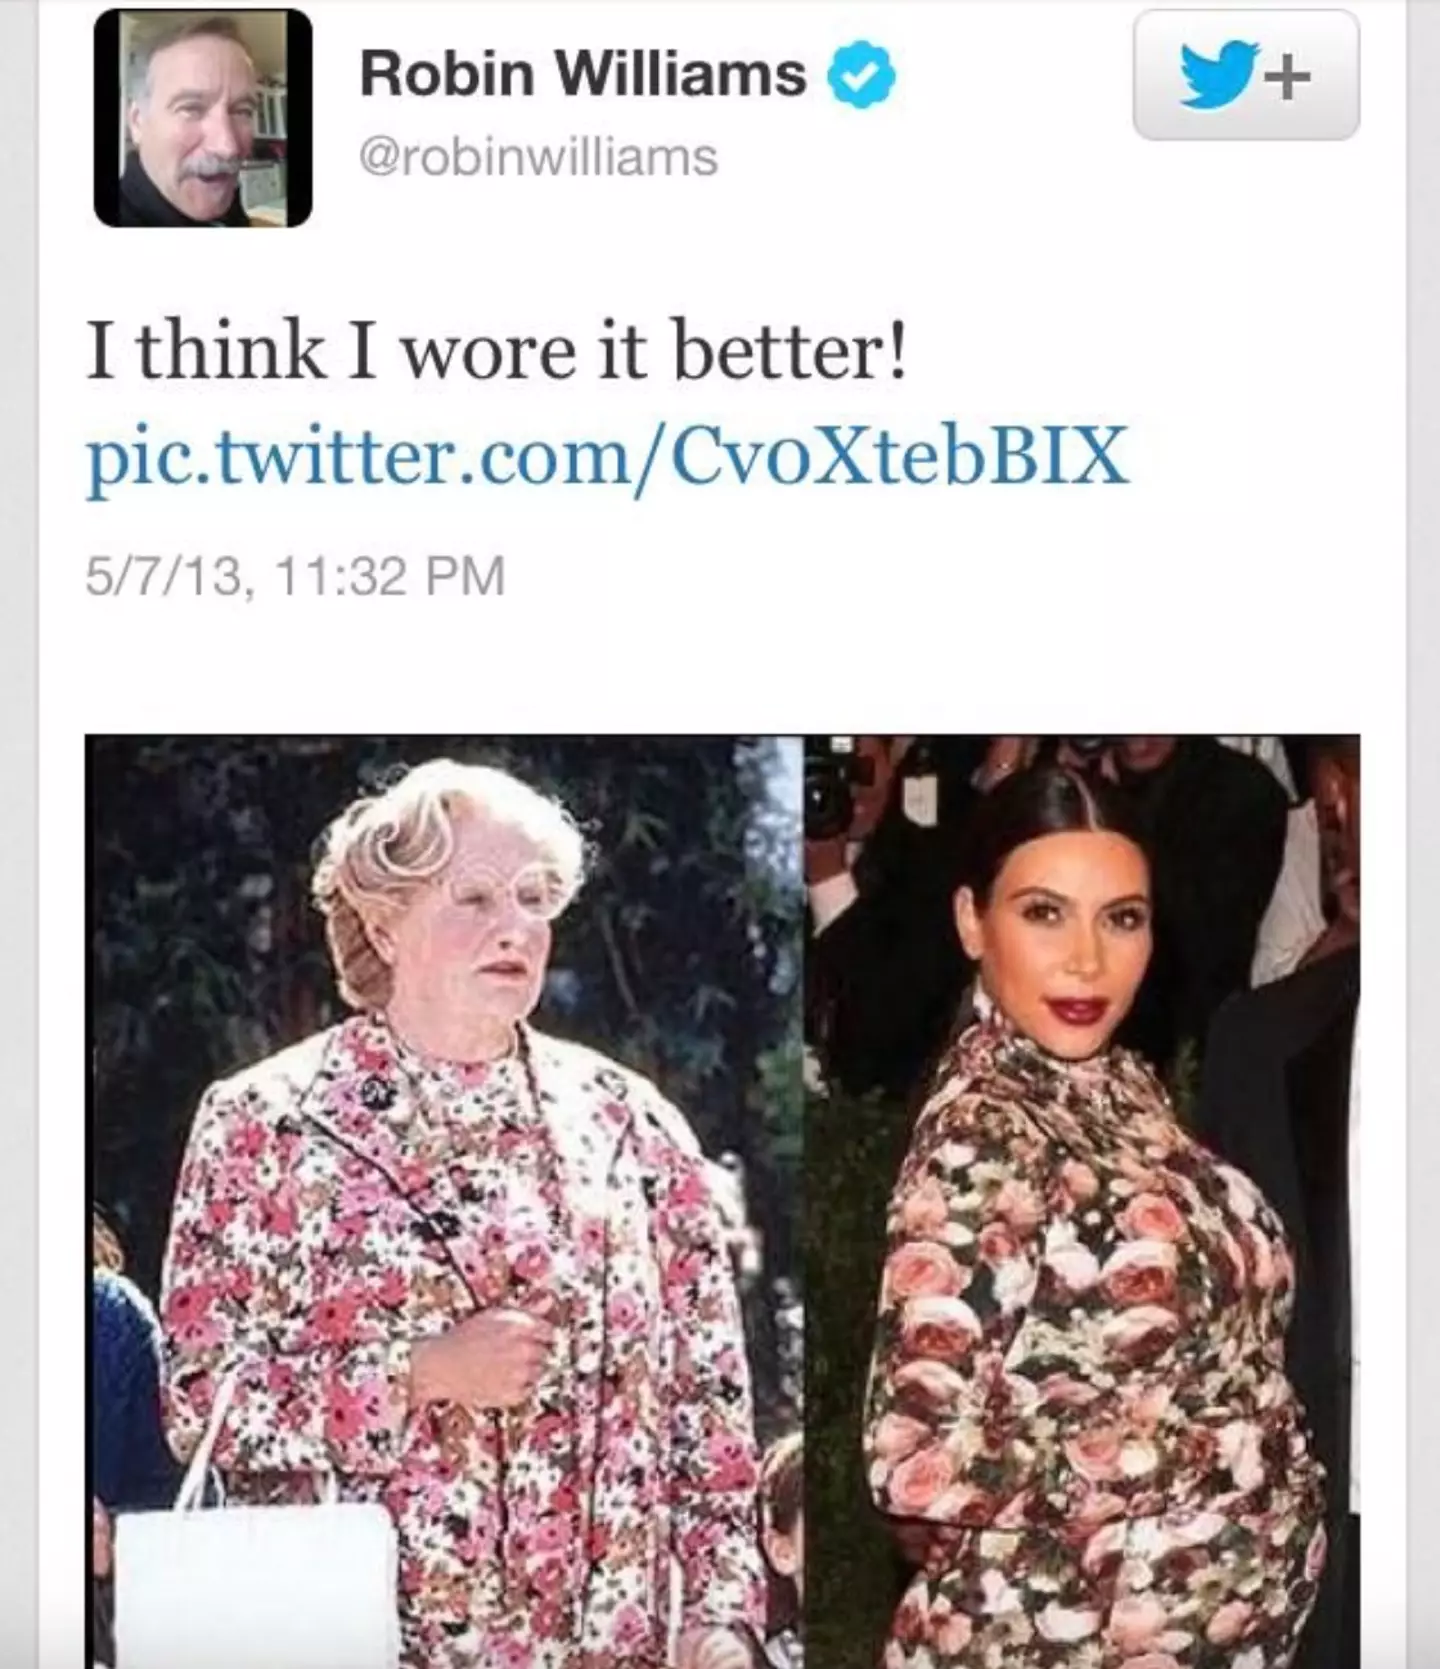 Robin Williams poked fun at her outfit.